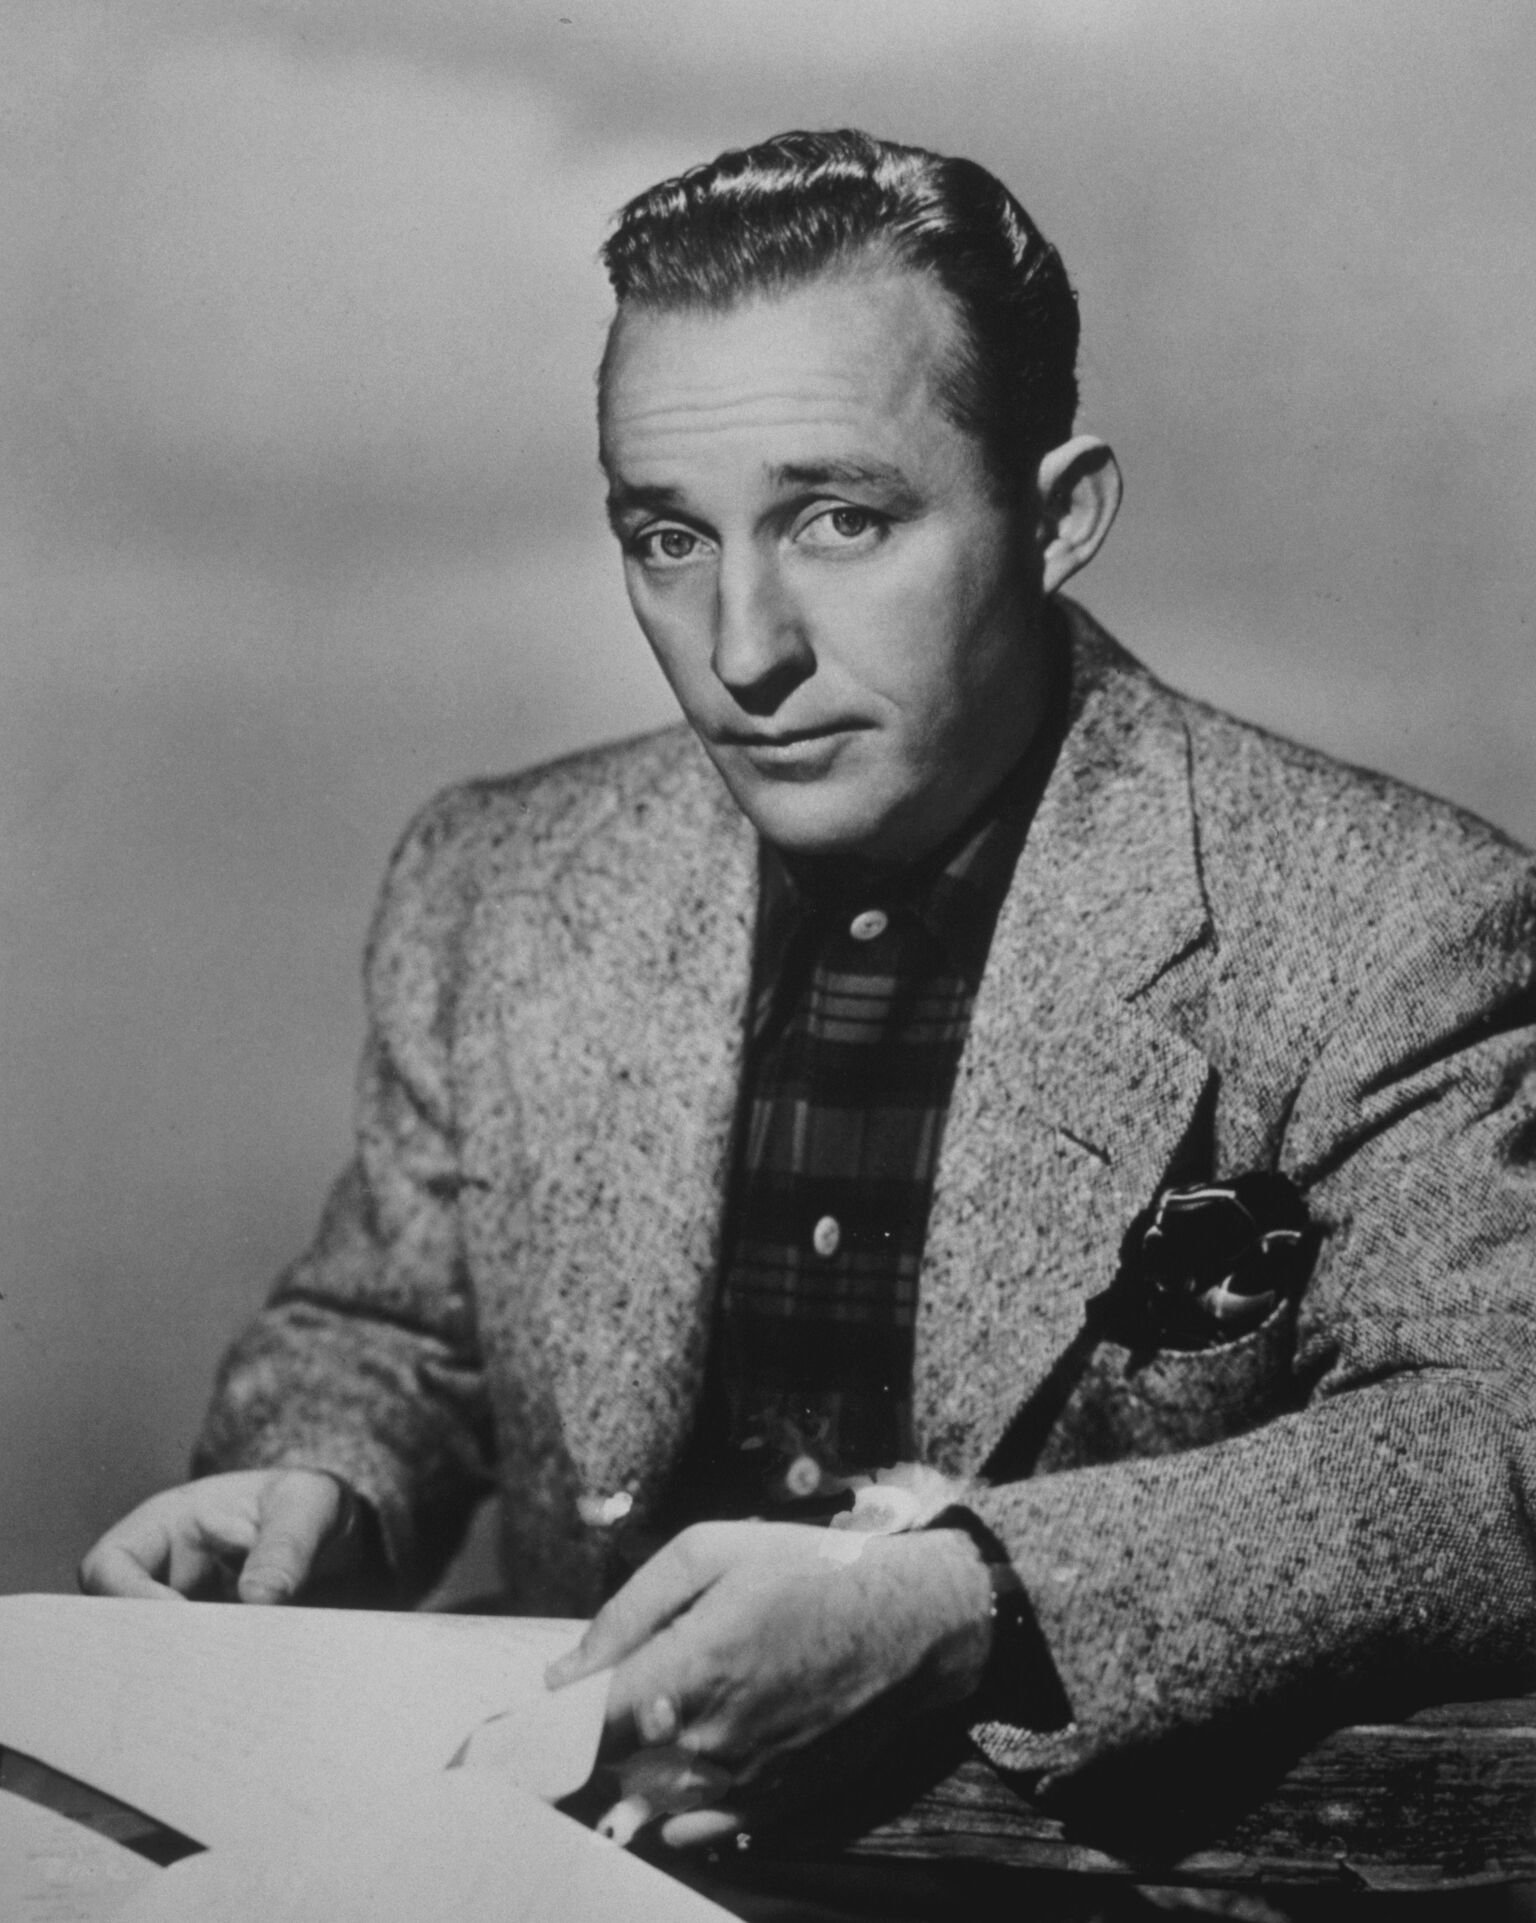 Headshot of American entertainer Bing Crosby | Getty Images